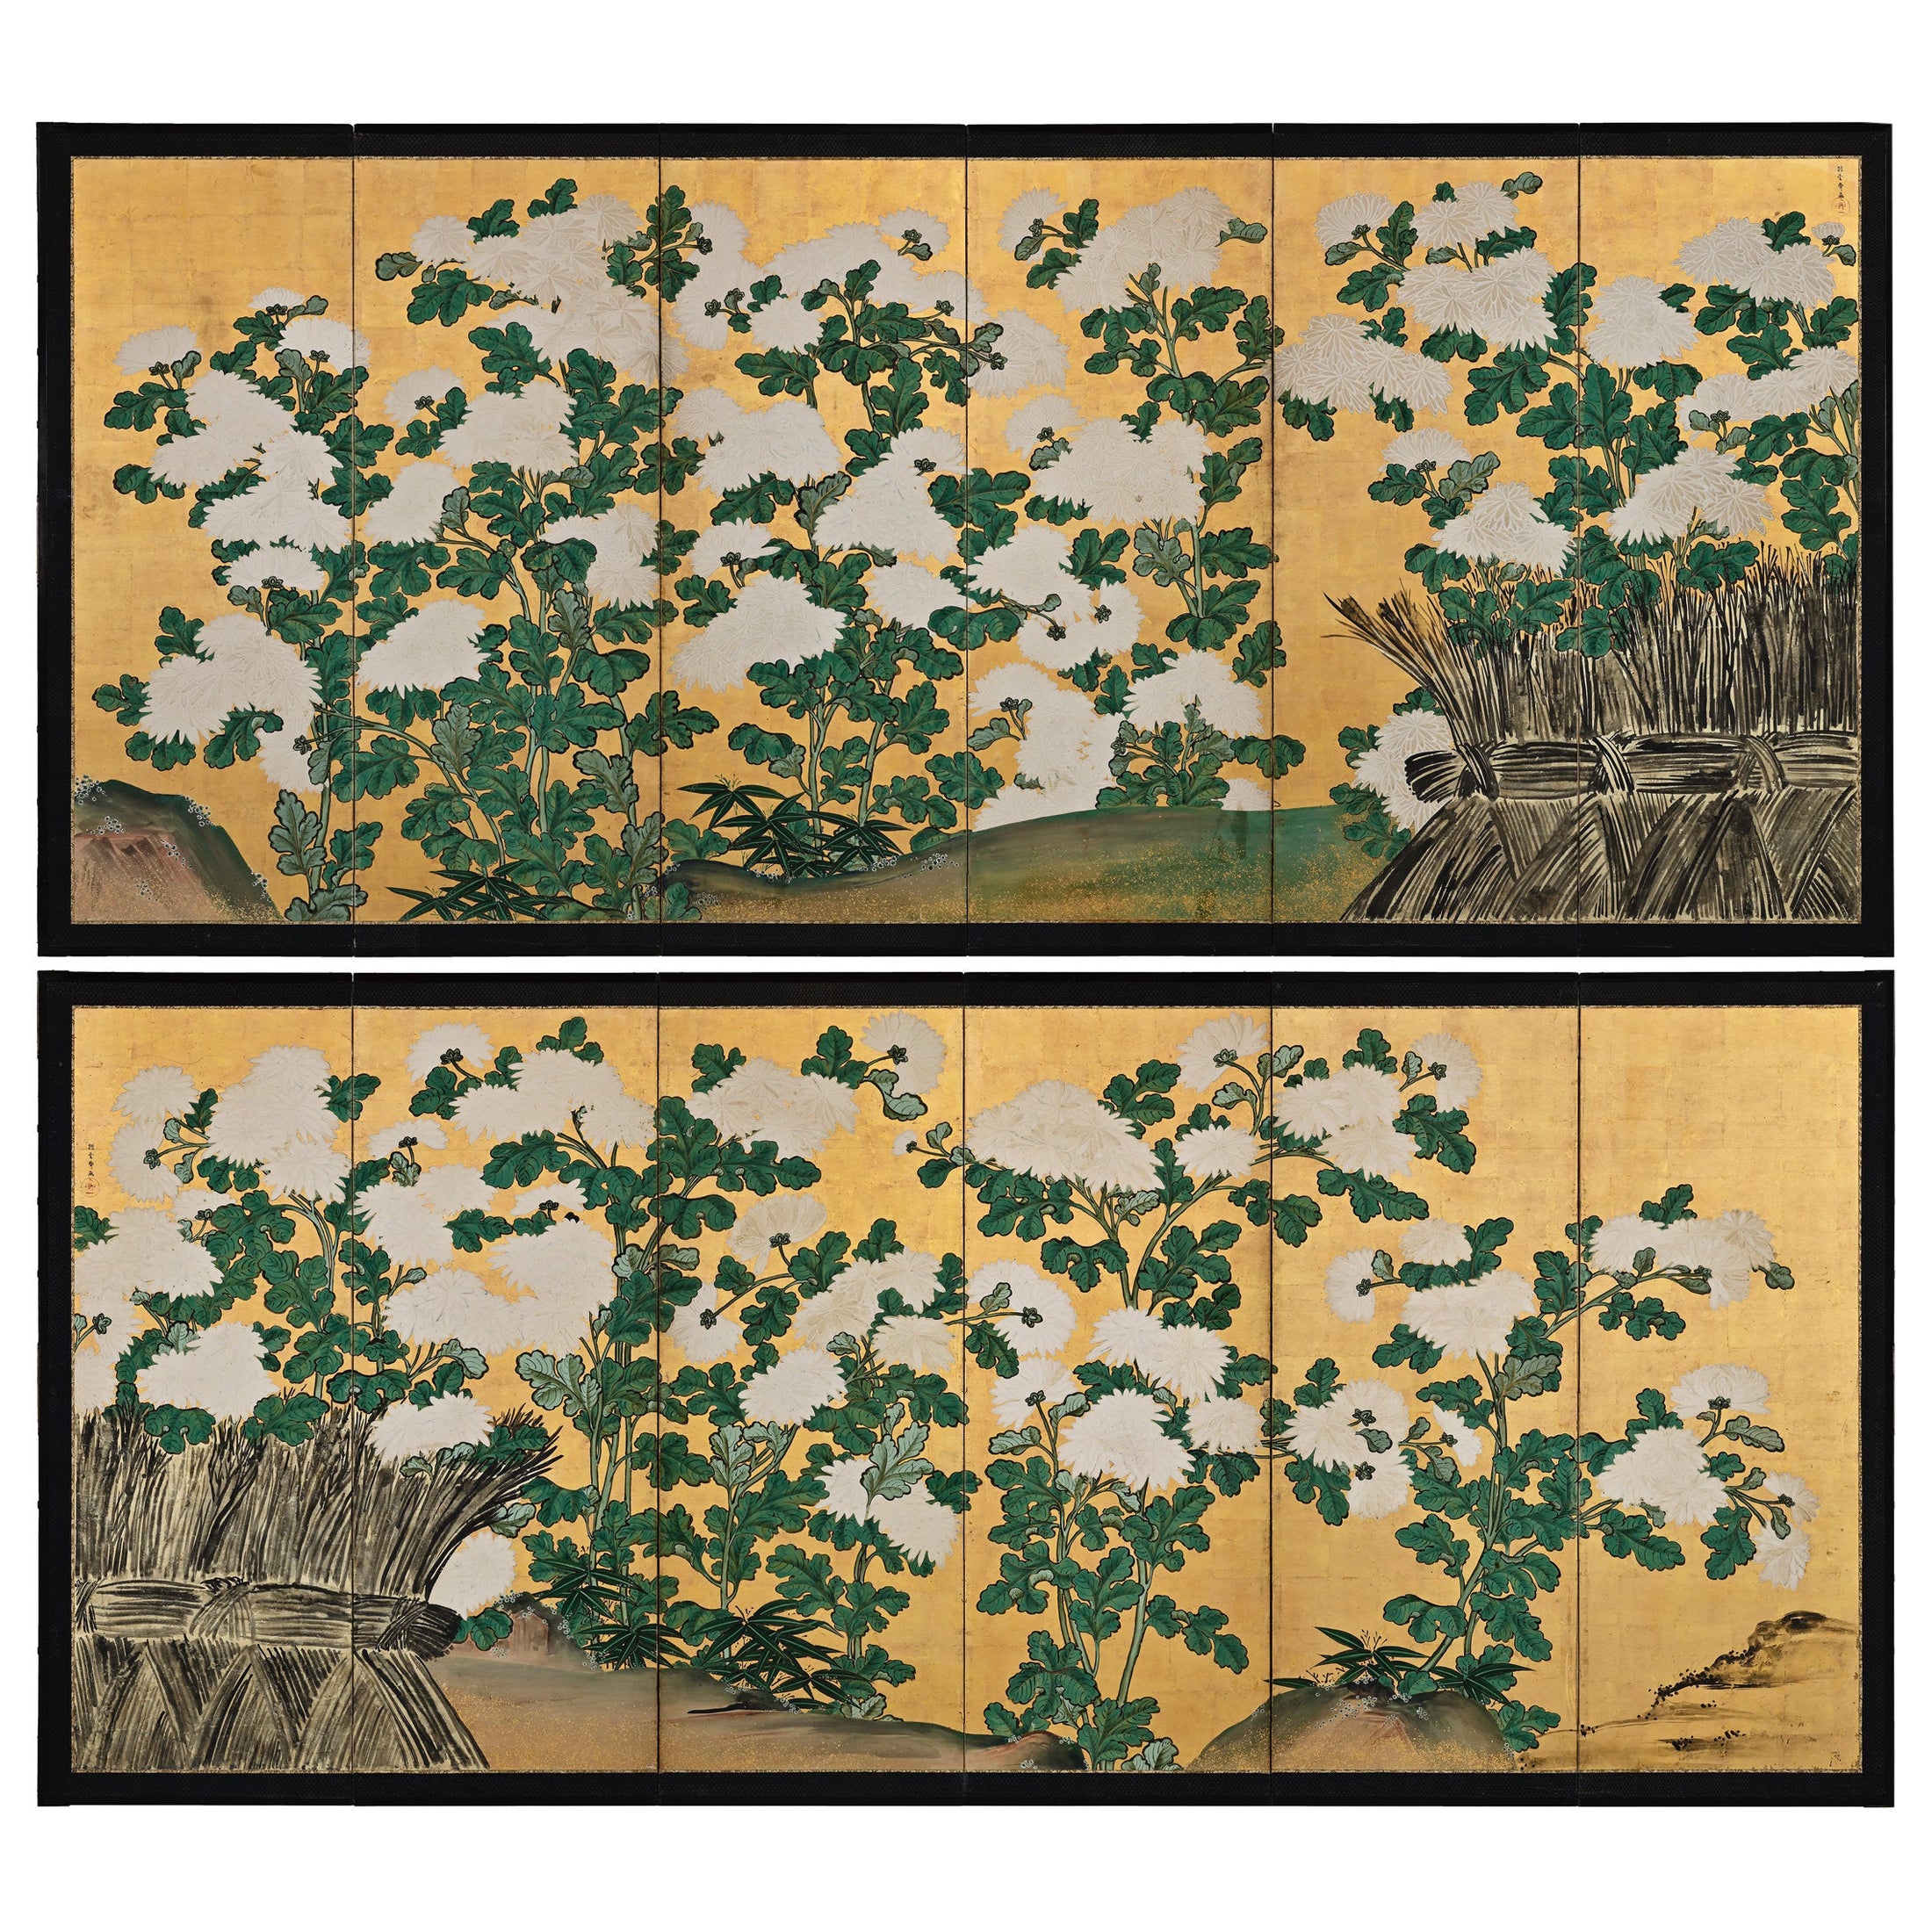 Mid-18th Century Japanese Screen Pair, One Hundred Flowers, Chrysanthemums